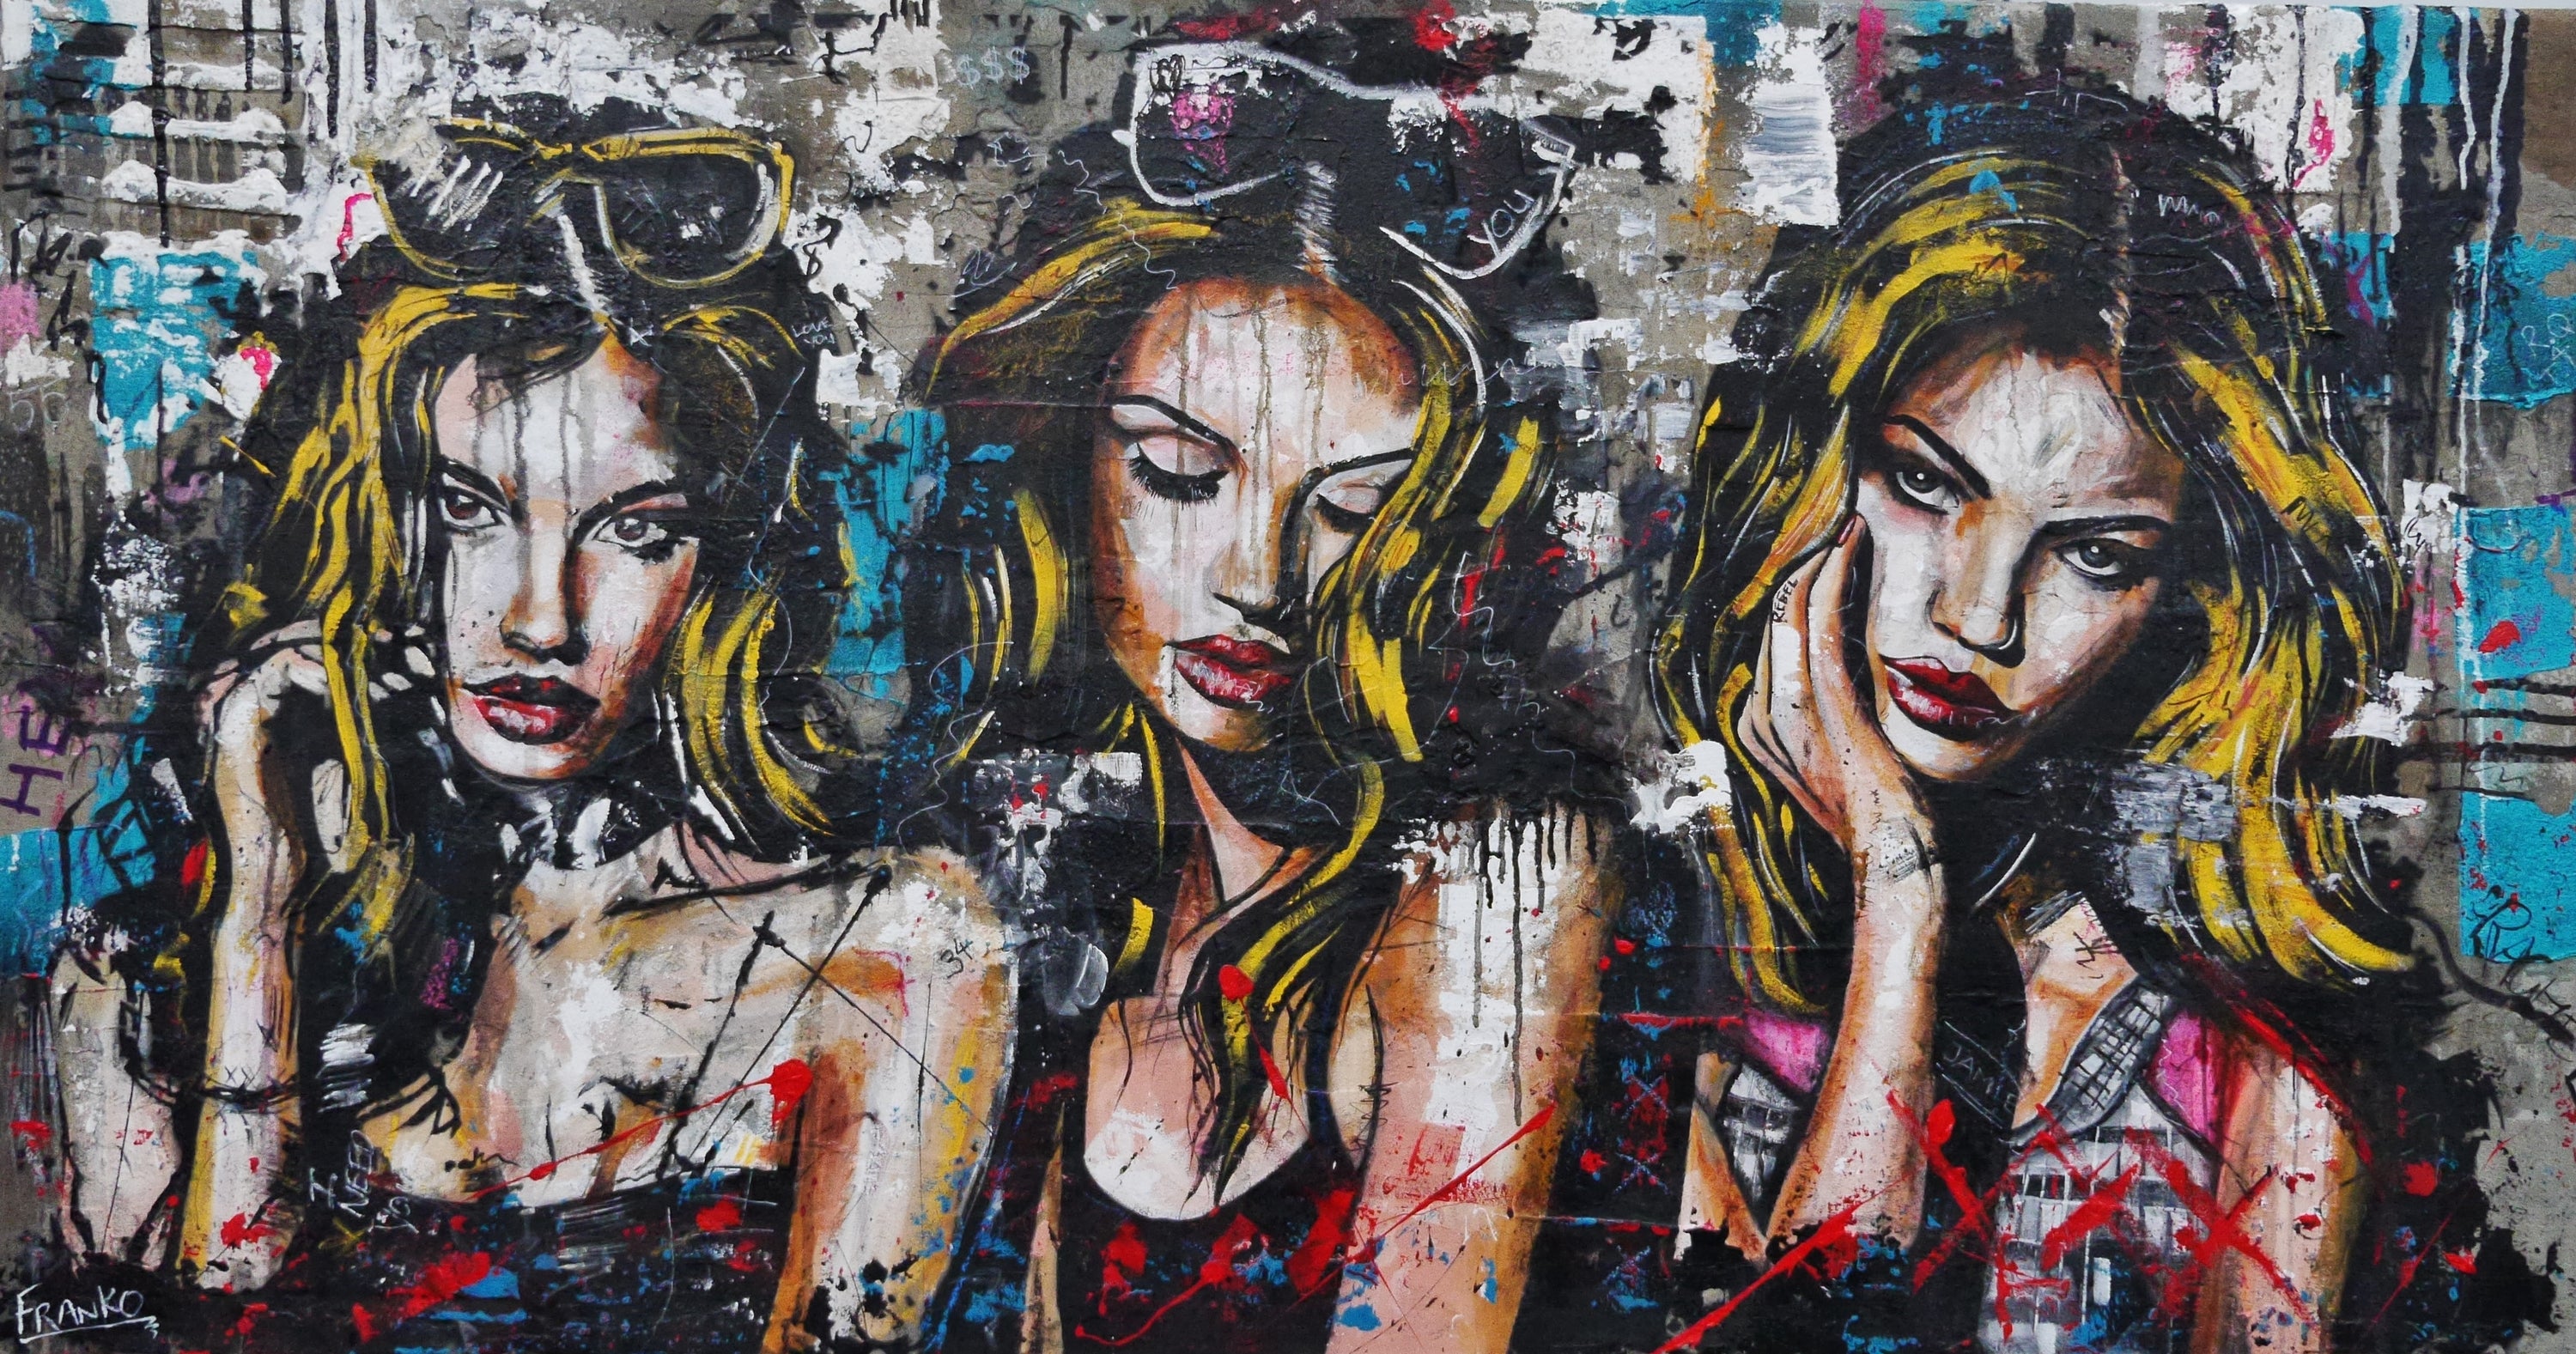 Raw Fates 190cm x 100cm Sultry Concrete Textured Industrial Urban Pop Art Painting (SOLD)